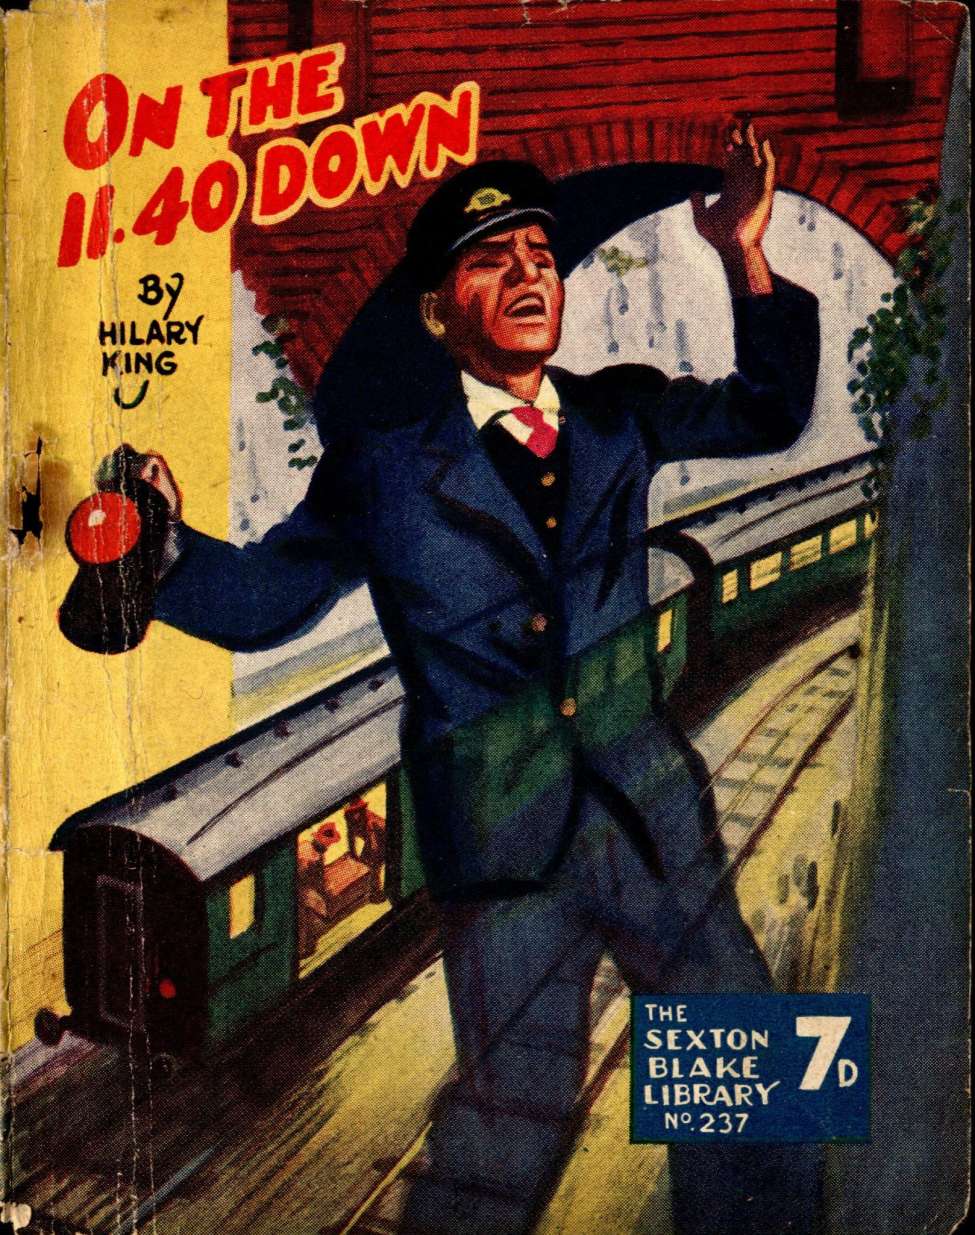 Comic Book Cover For Sexton Blake Library S3 237 - On the 11.40 Down